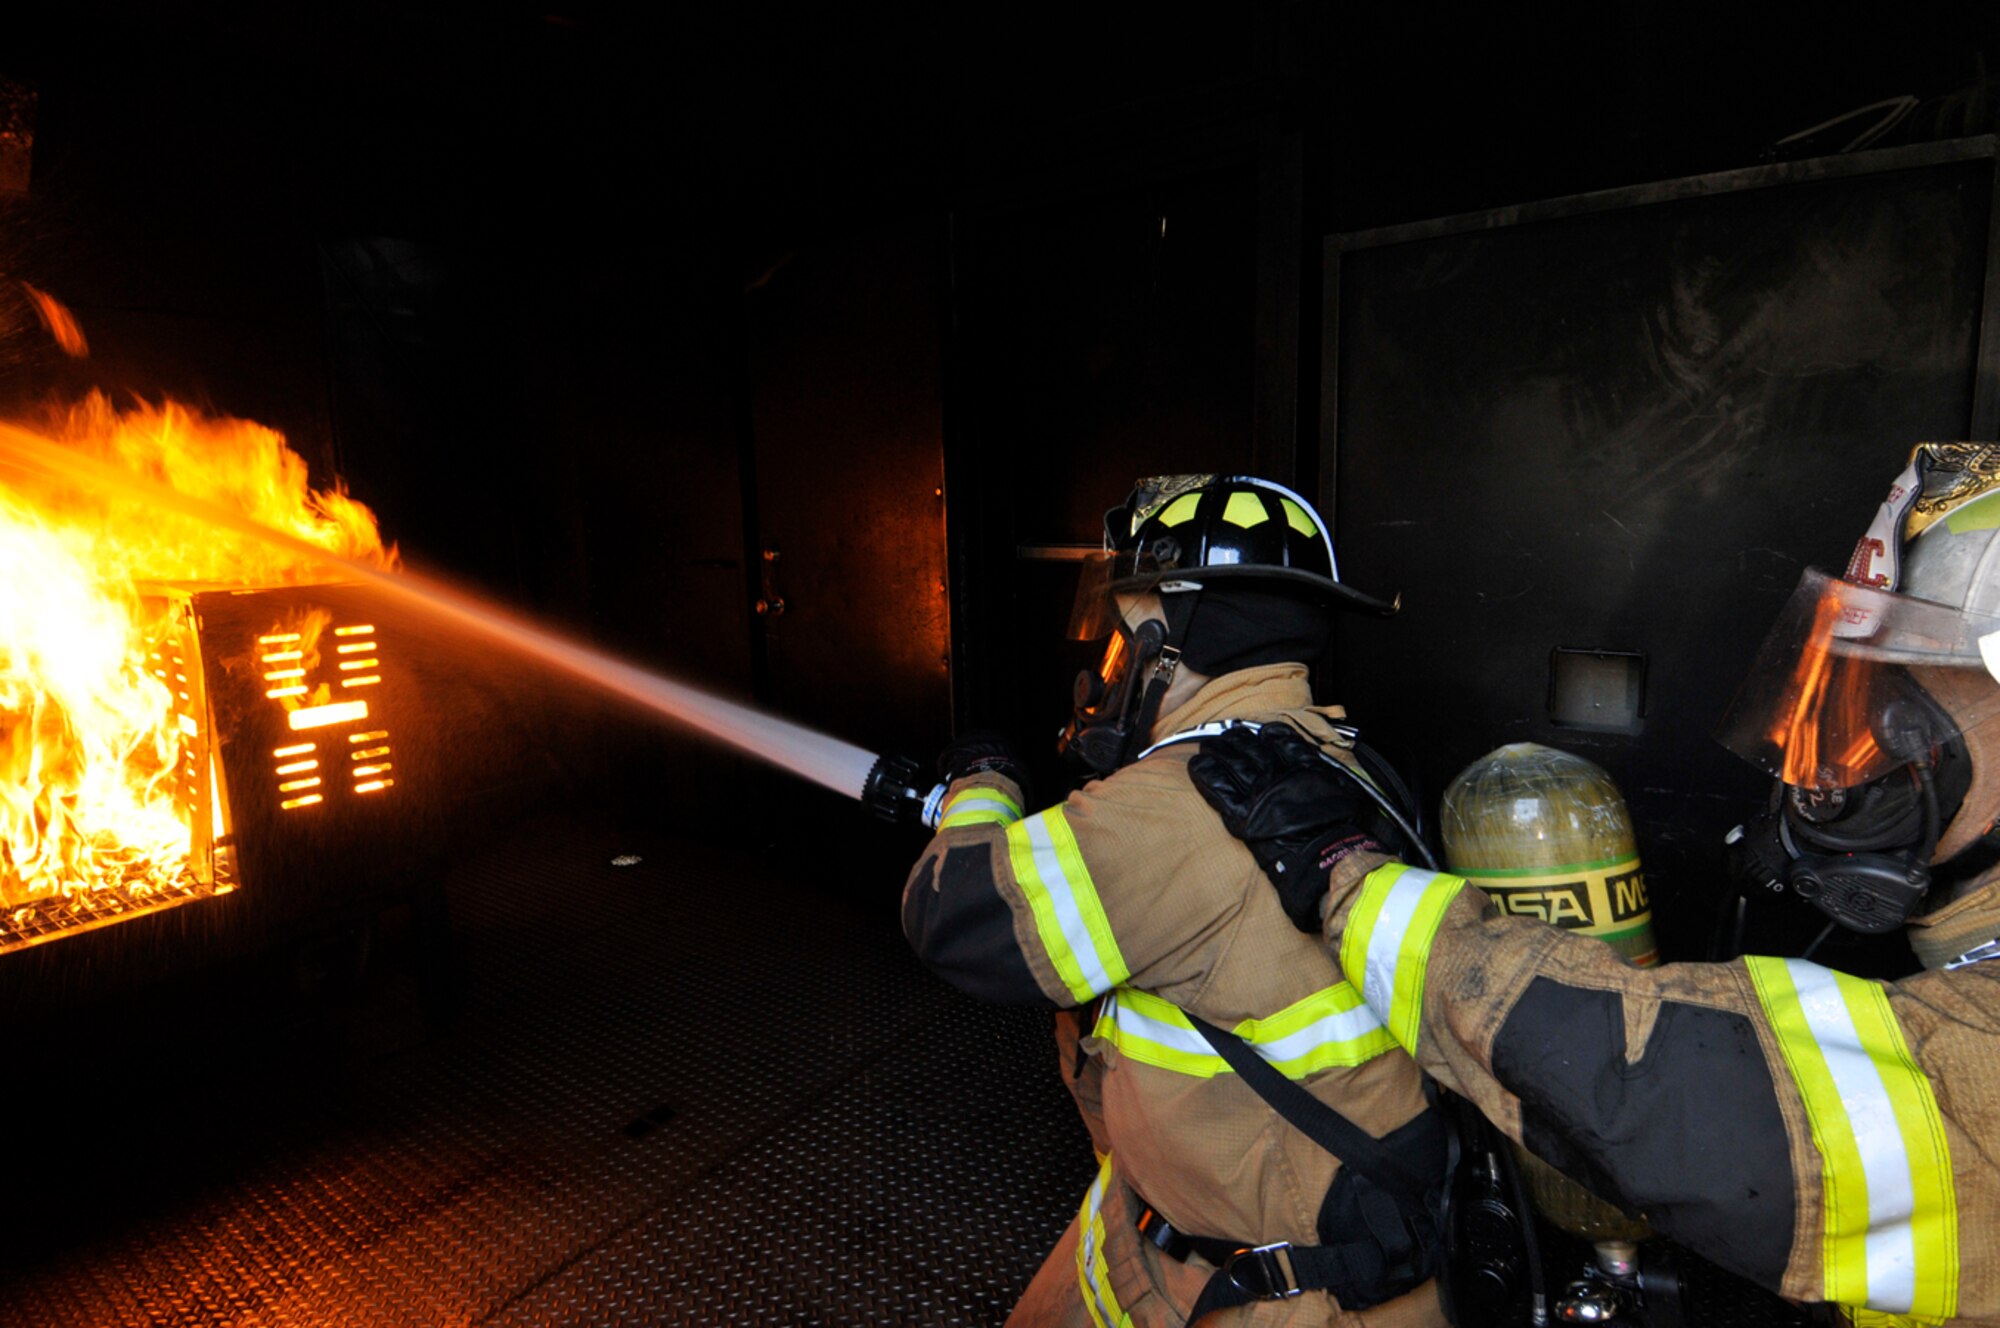 AEDC firefighters extinguish a fire in West Virginia University Fire Service Extension’s training unit March 27. The fires in the trailer are fueled by propane. (Photo by Rick Goodfriend)